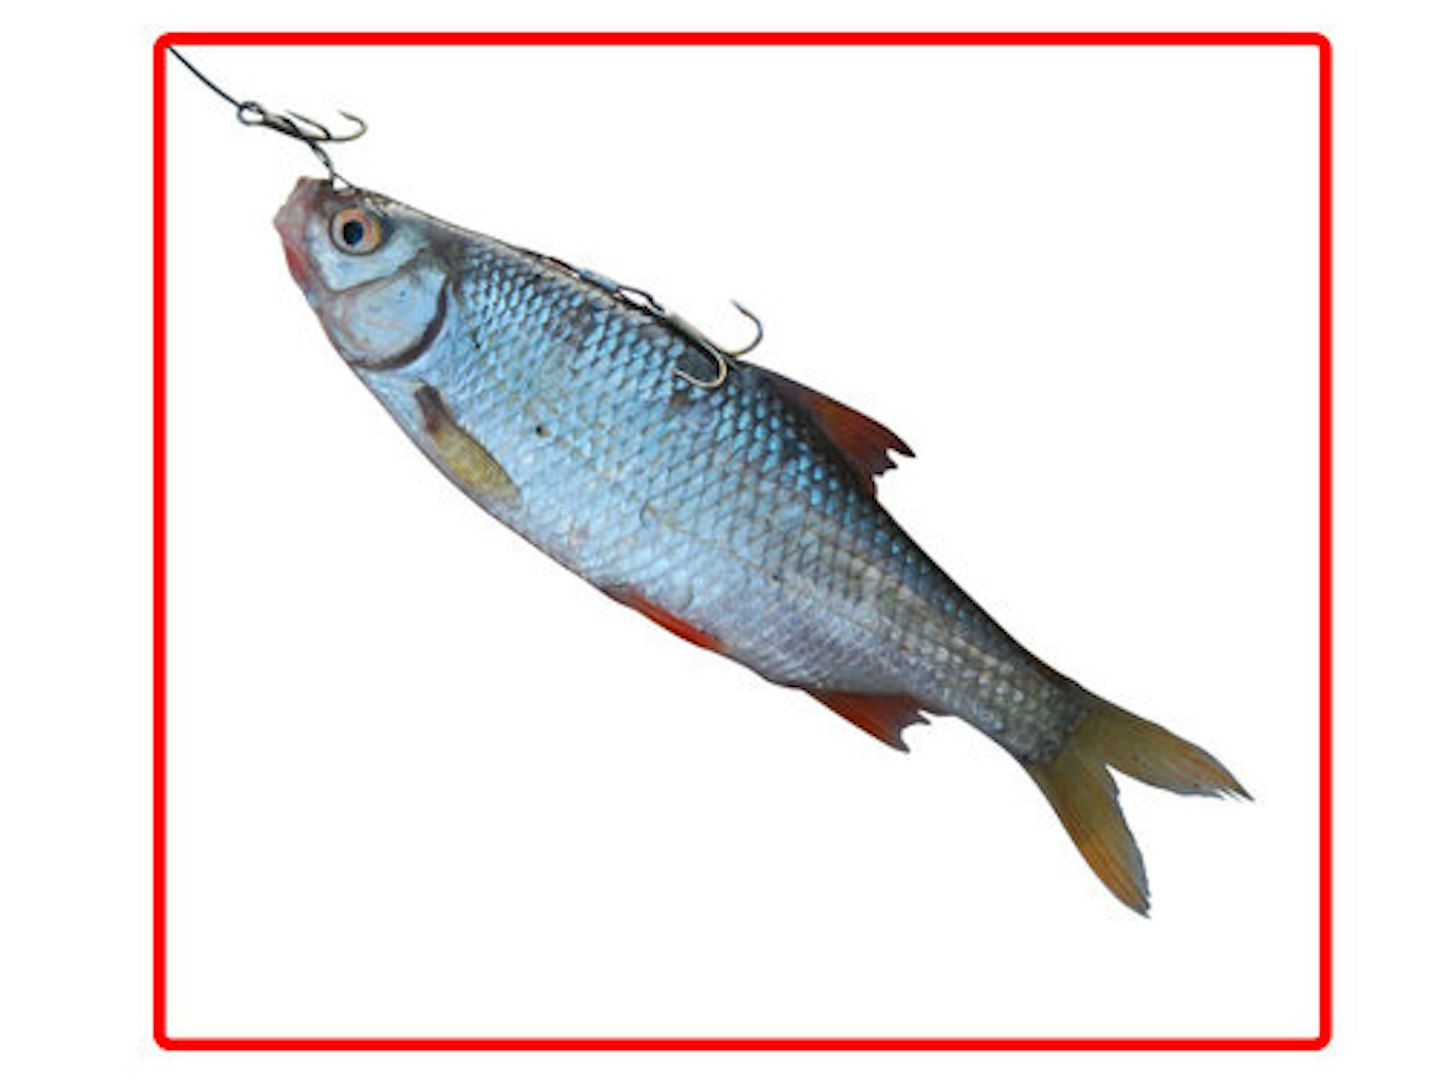 BEST BAITS TO USE TO CATCH BIG PERCH